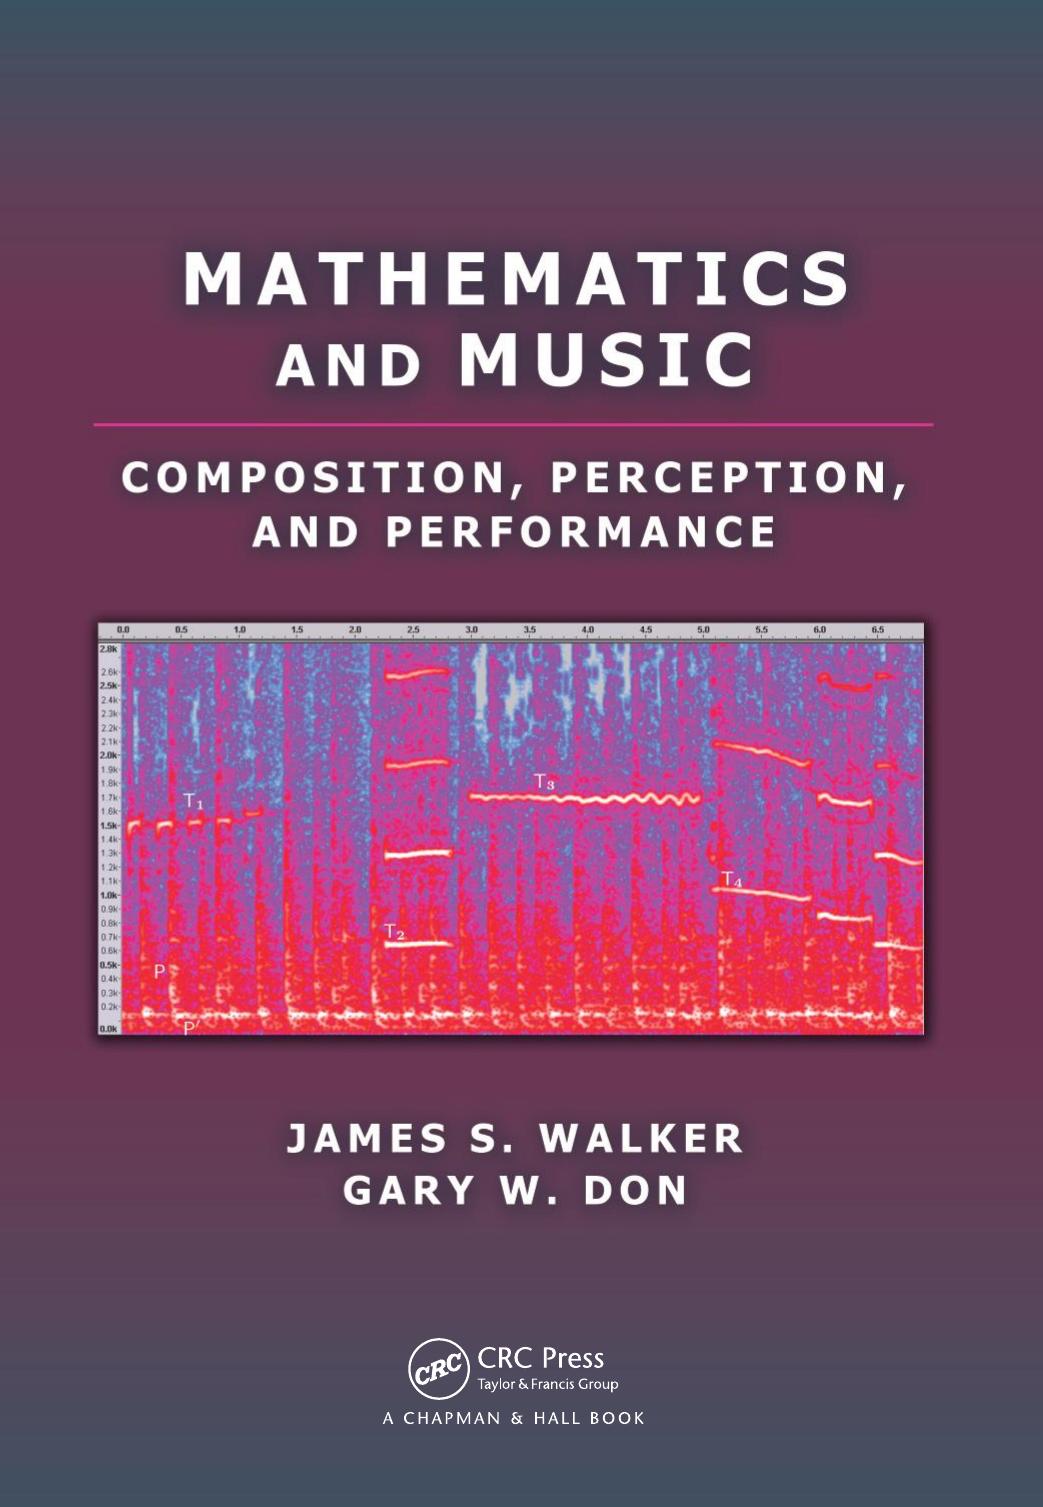 Mathematics and Music: Composition, Perception, and Performance